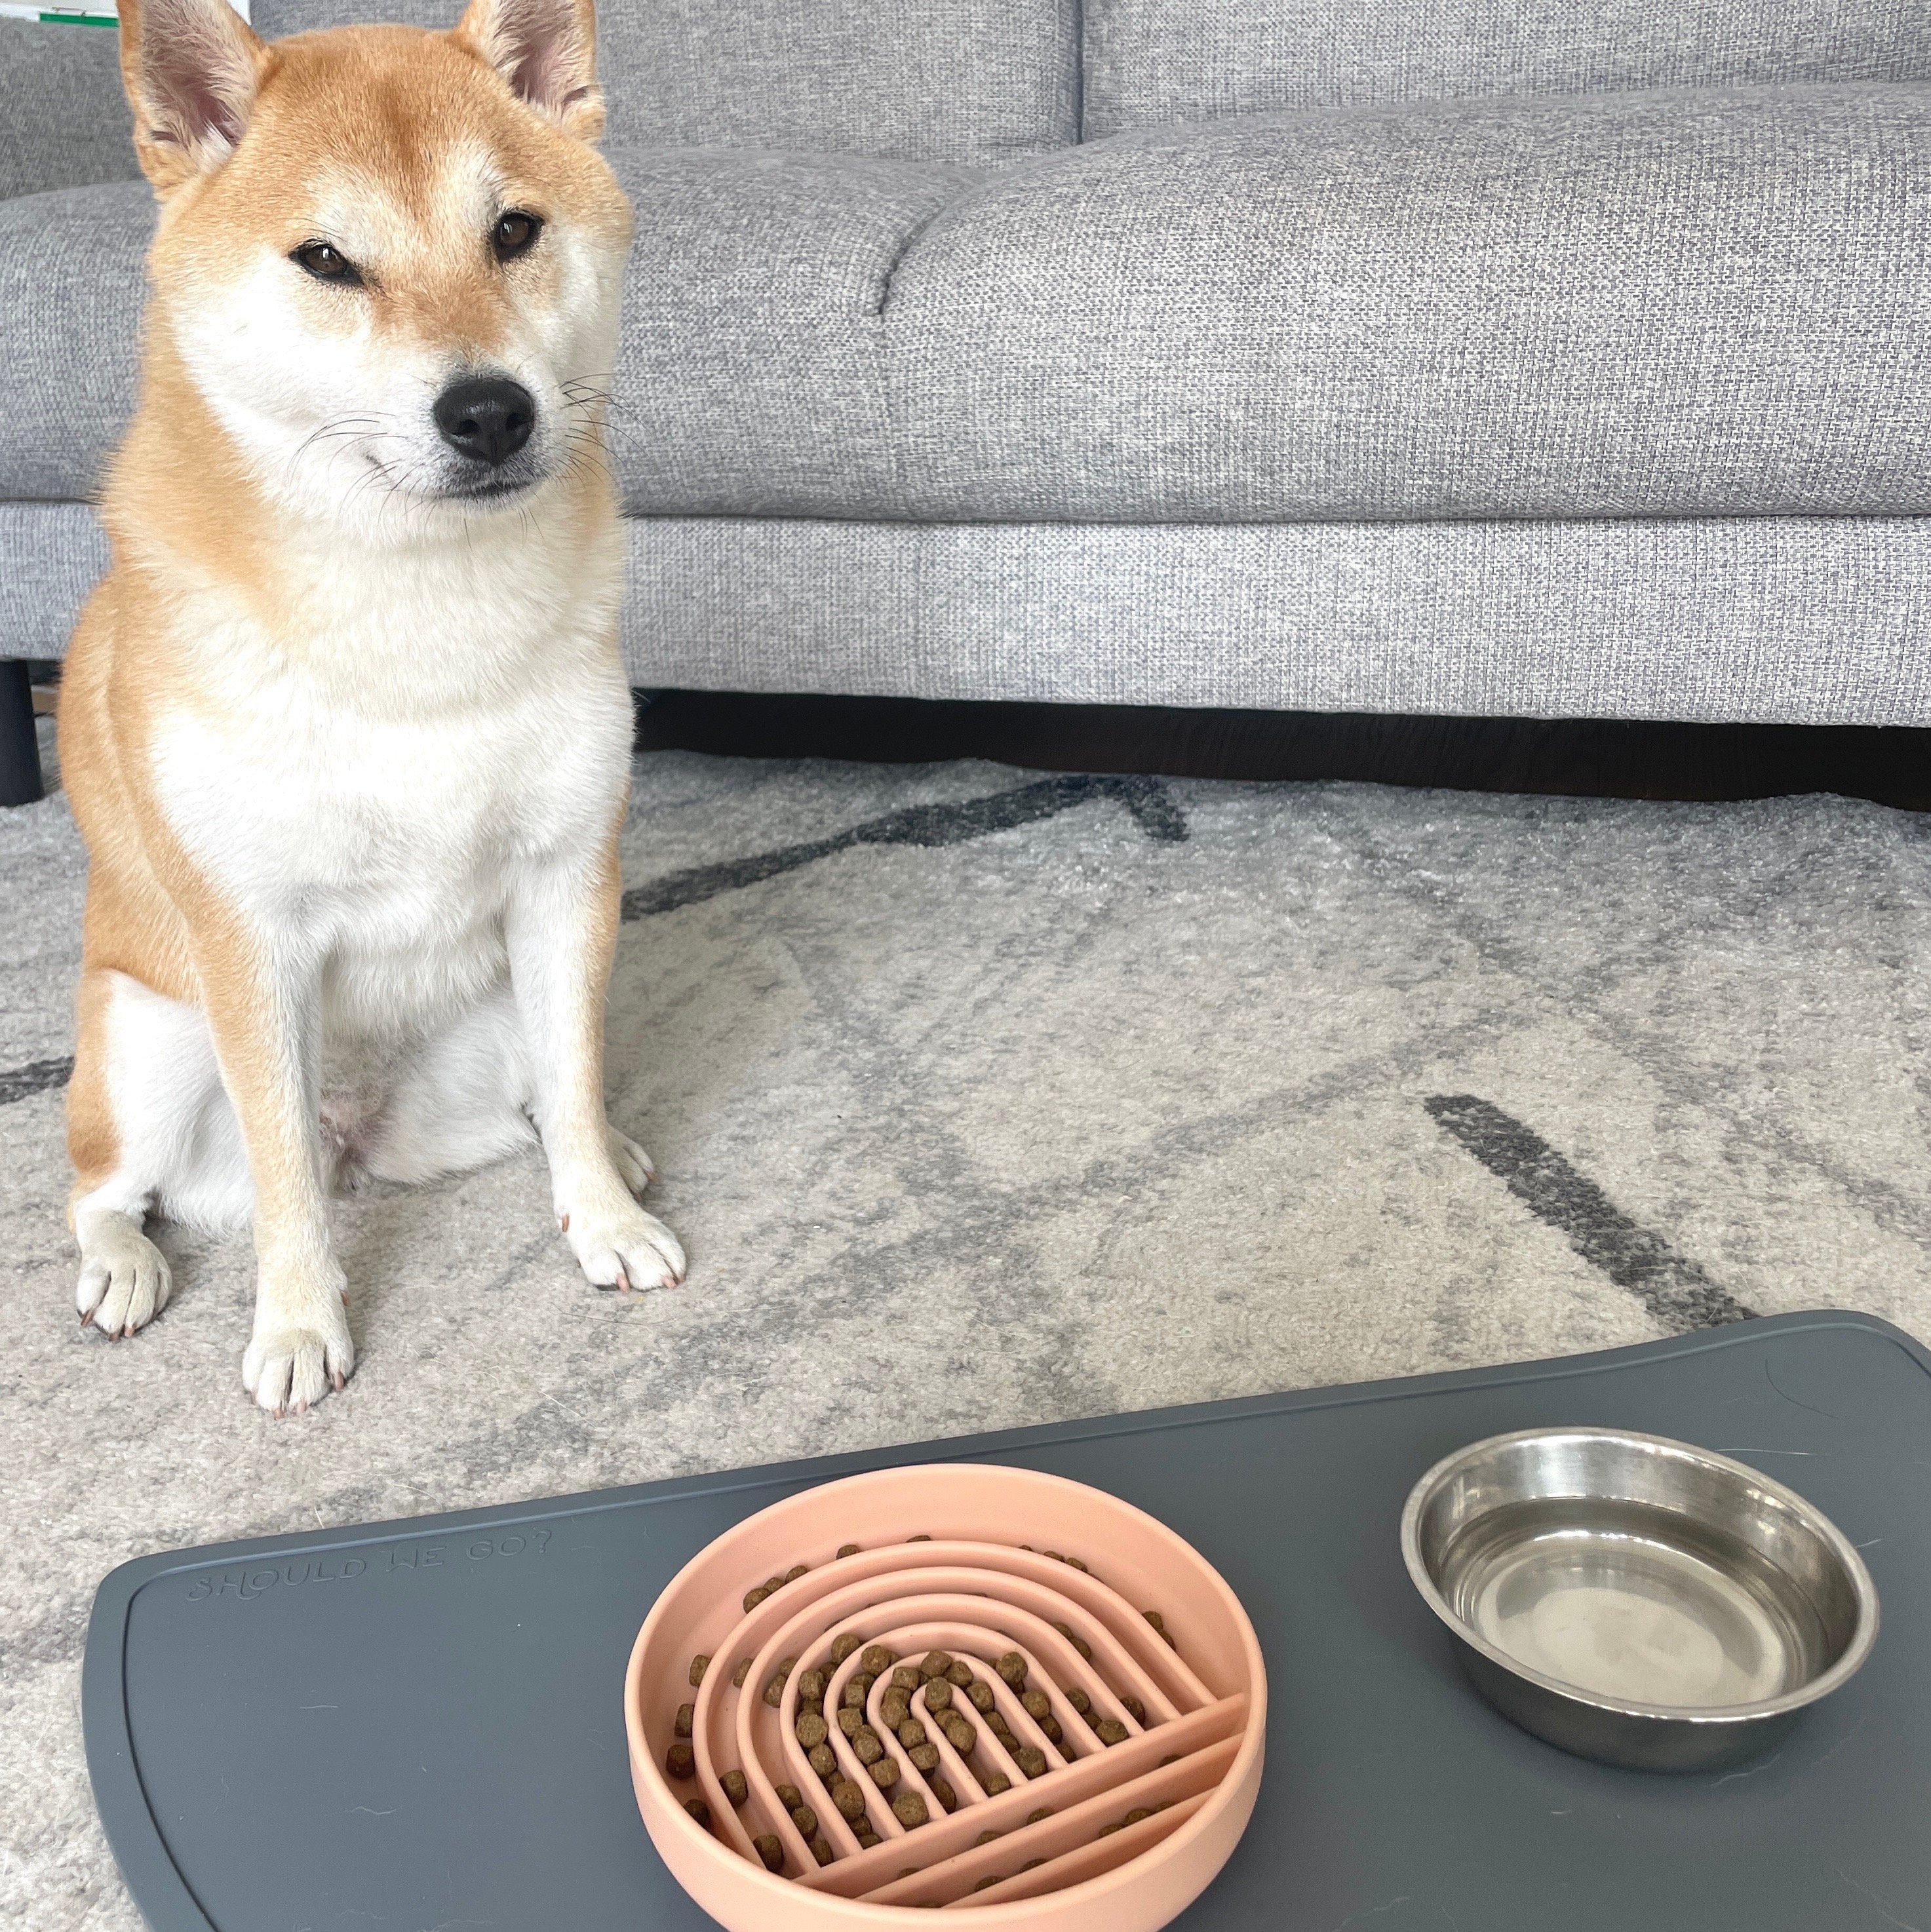 Dog Food Mat - Waterproof Dog Bowl Mat, Silicone Dog Mat for Food and Water,  Pet Food Mat with Edges, Dog Food Mats for Floors, Nonslip Dog Feeding Mat  